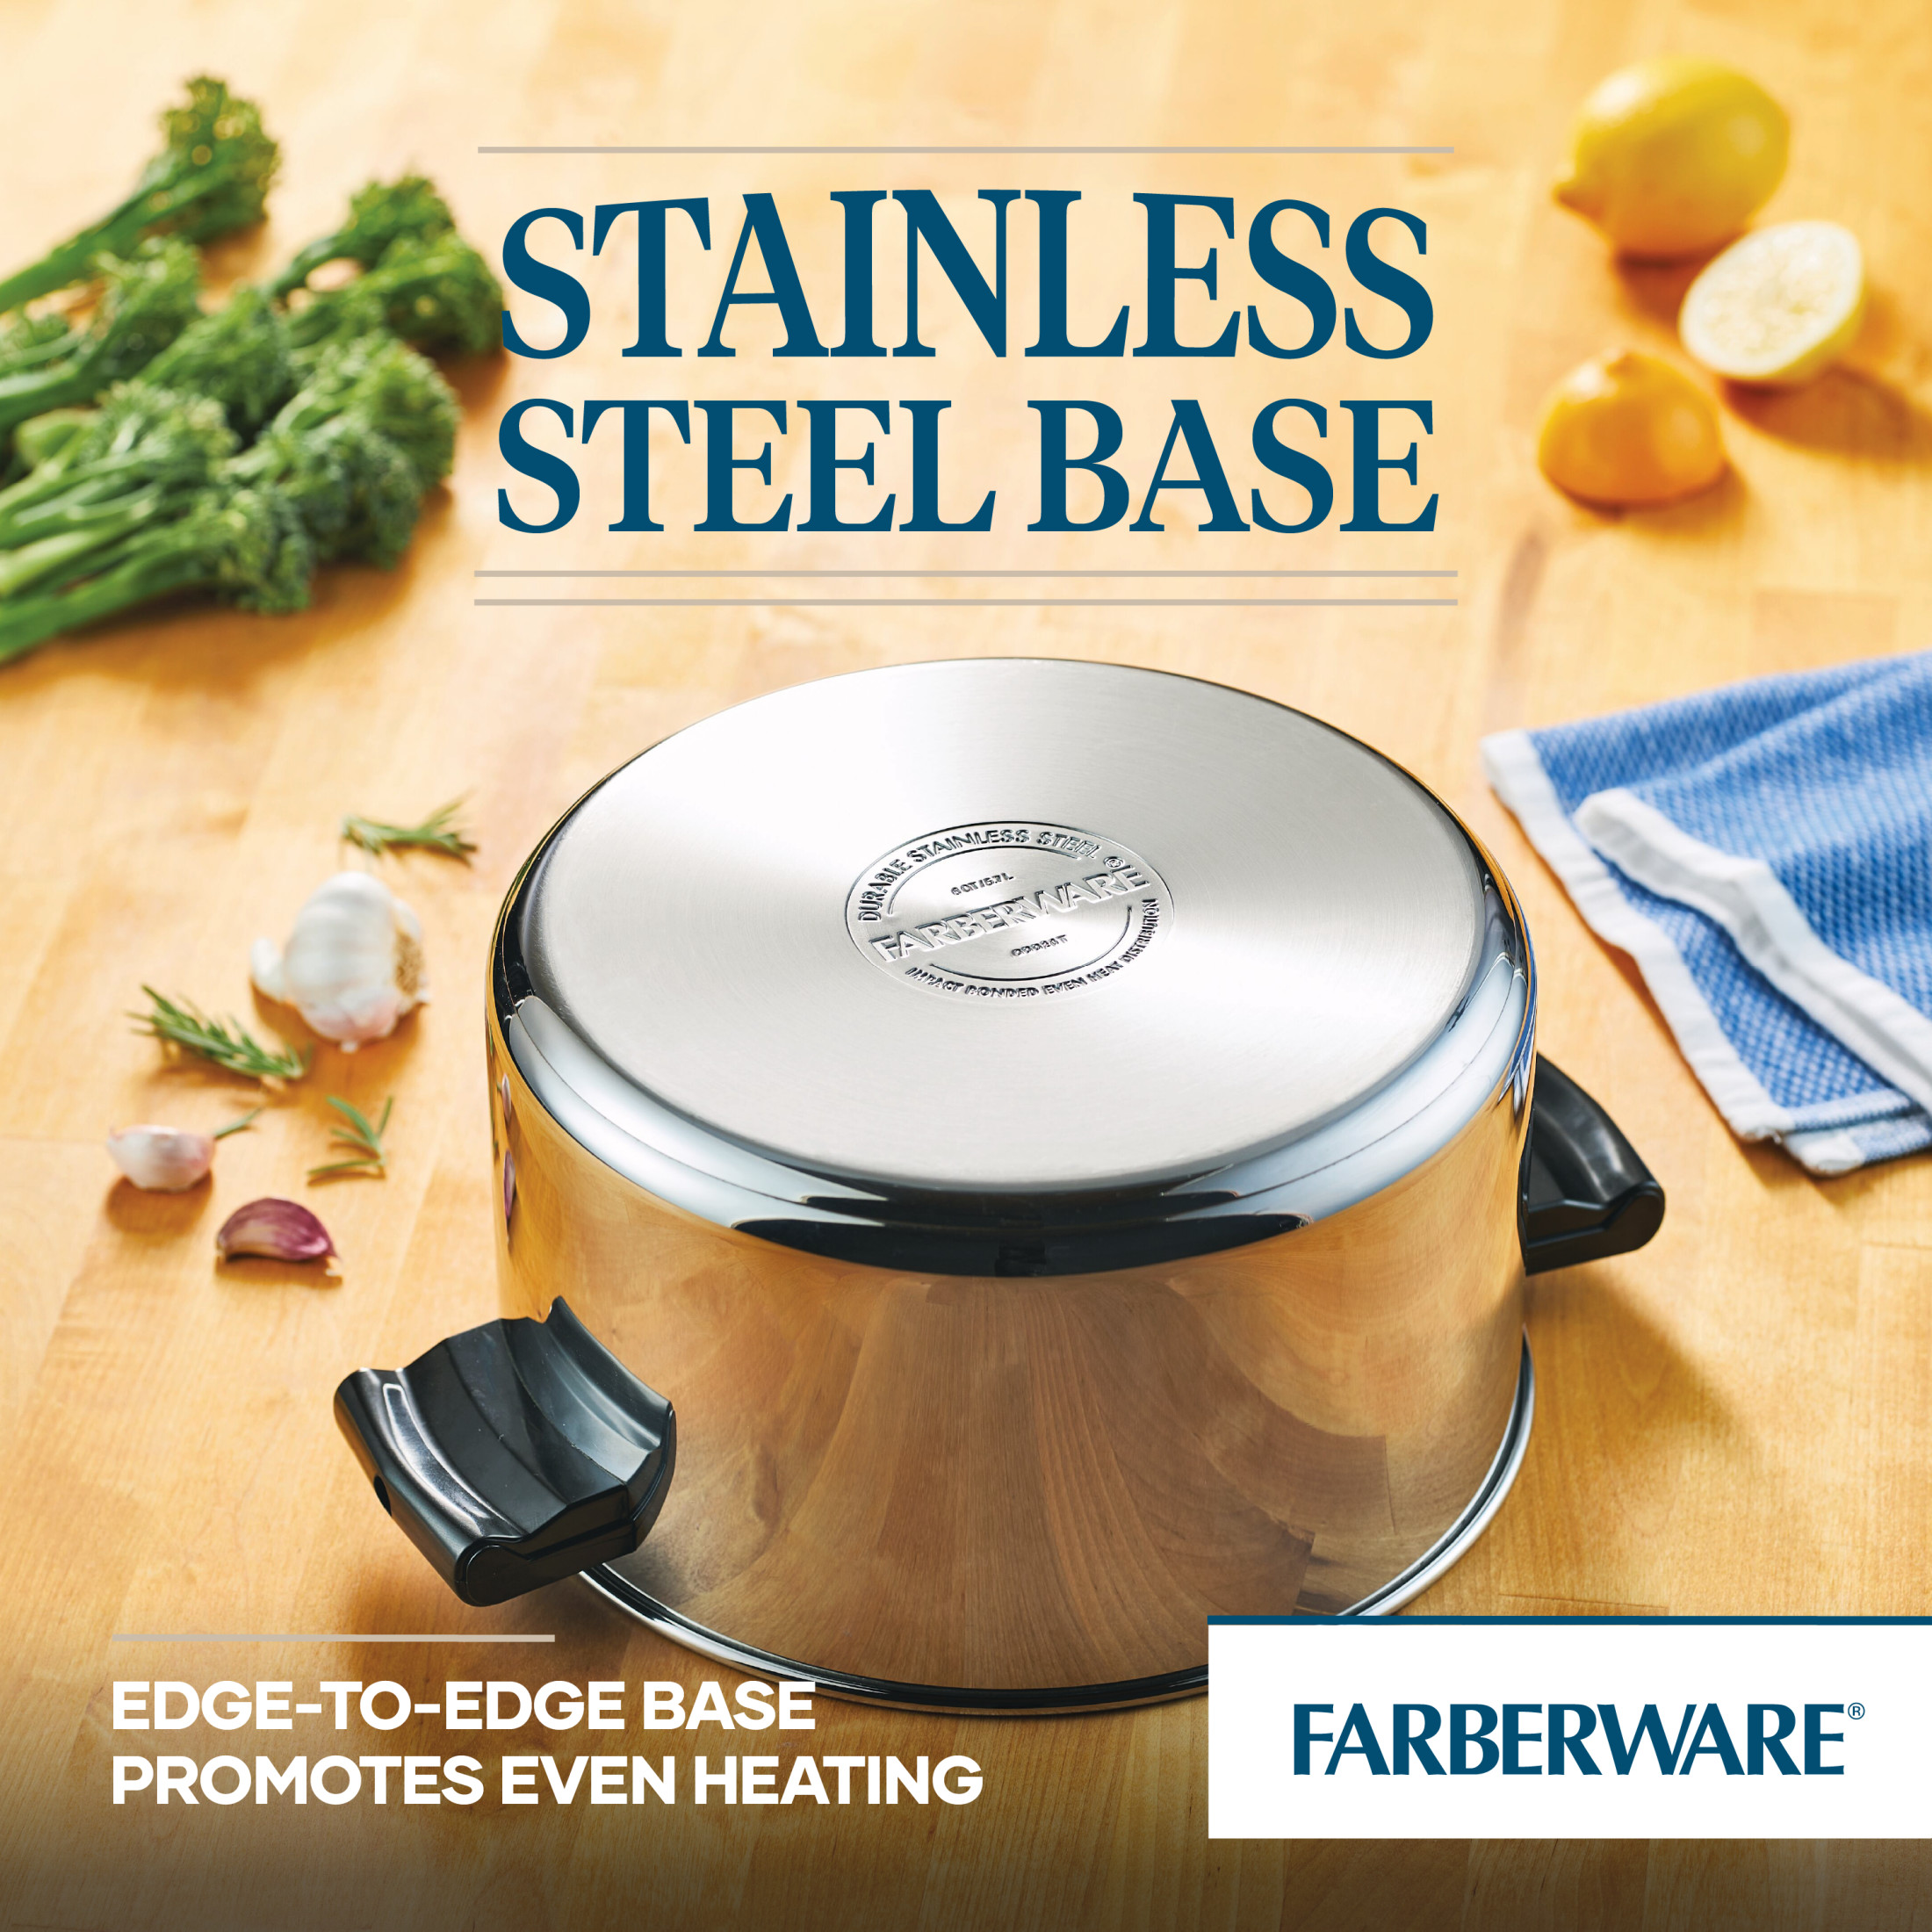 Farberware Classic 6 Quart Stainless Steel Covered Saucepot - image 3 of 9